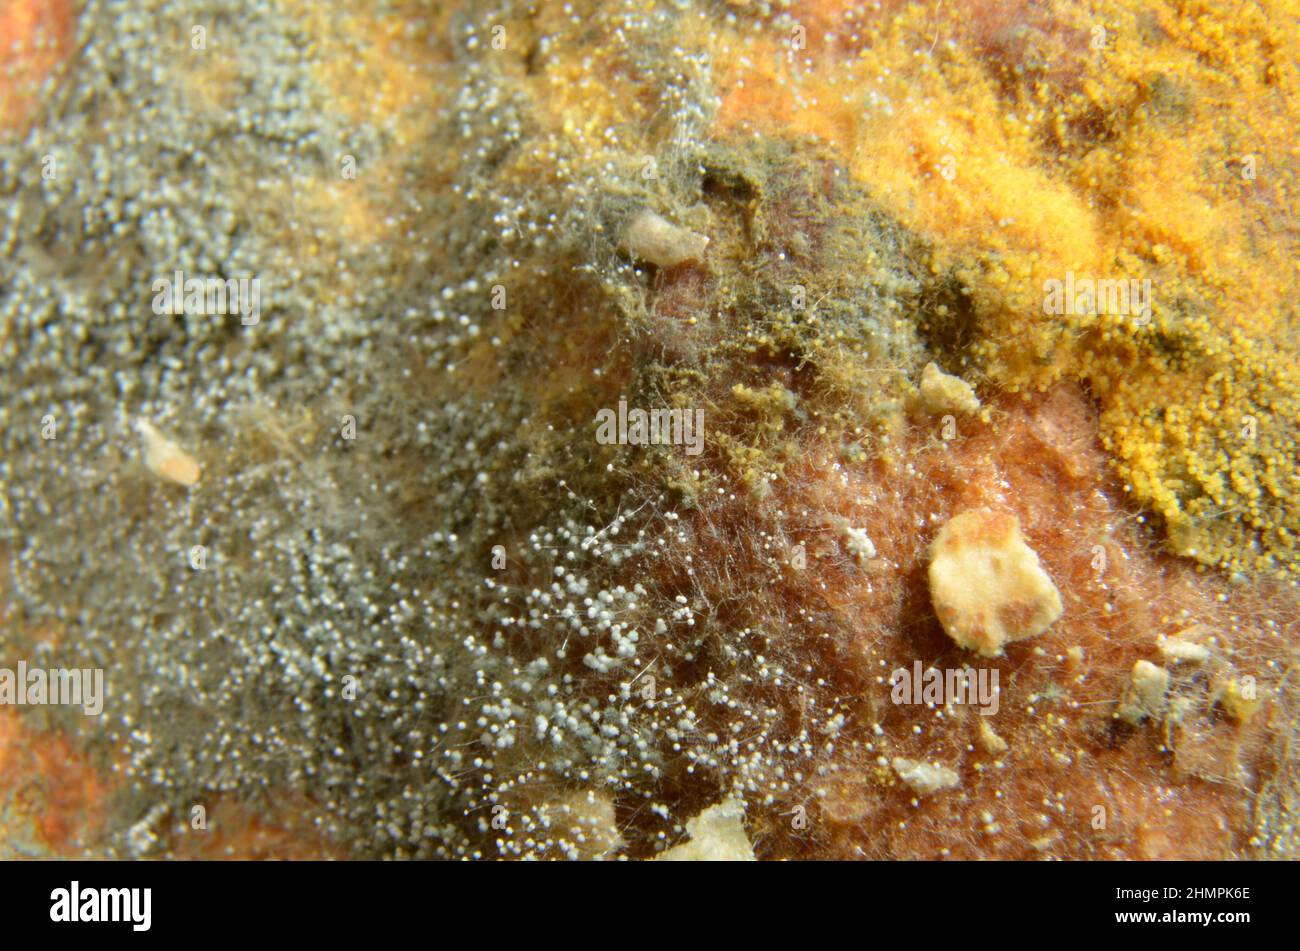 Microphoto of mould on white bread, focus on foreground. Stock Photo